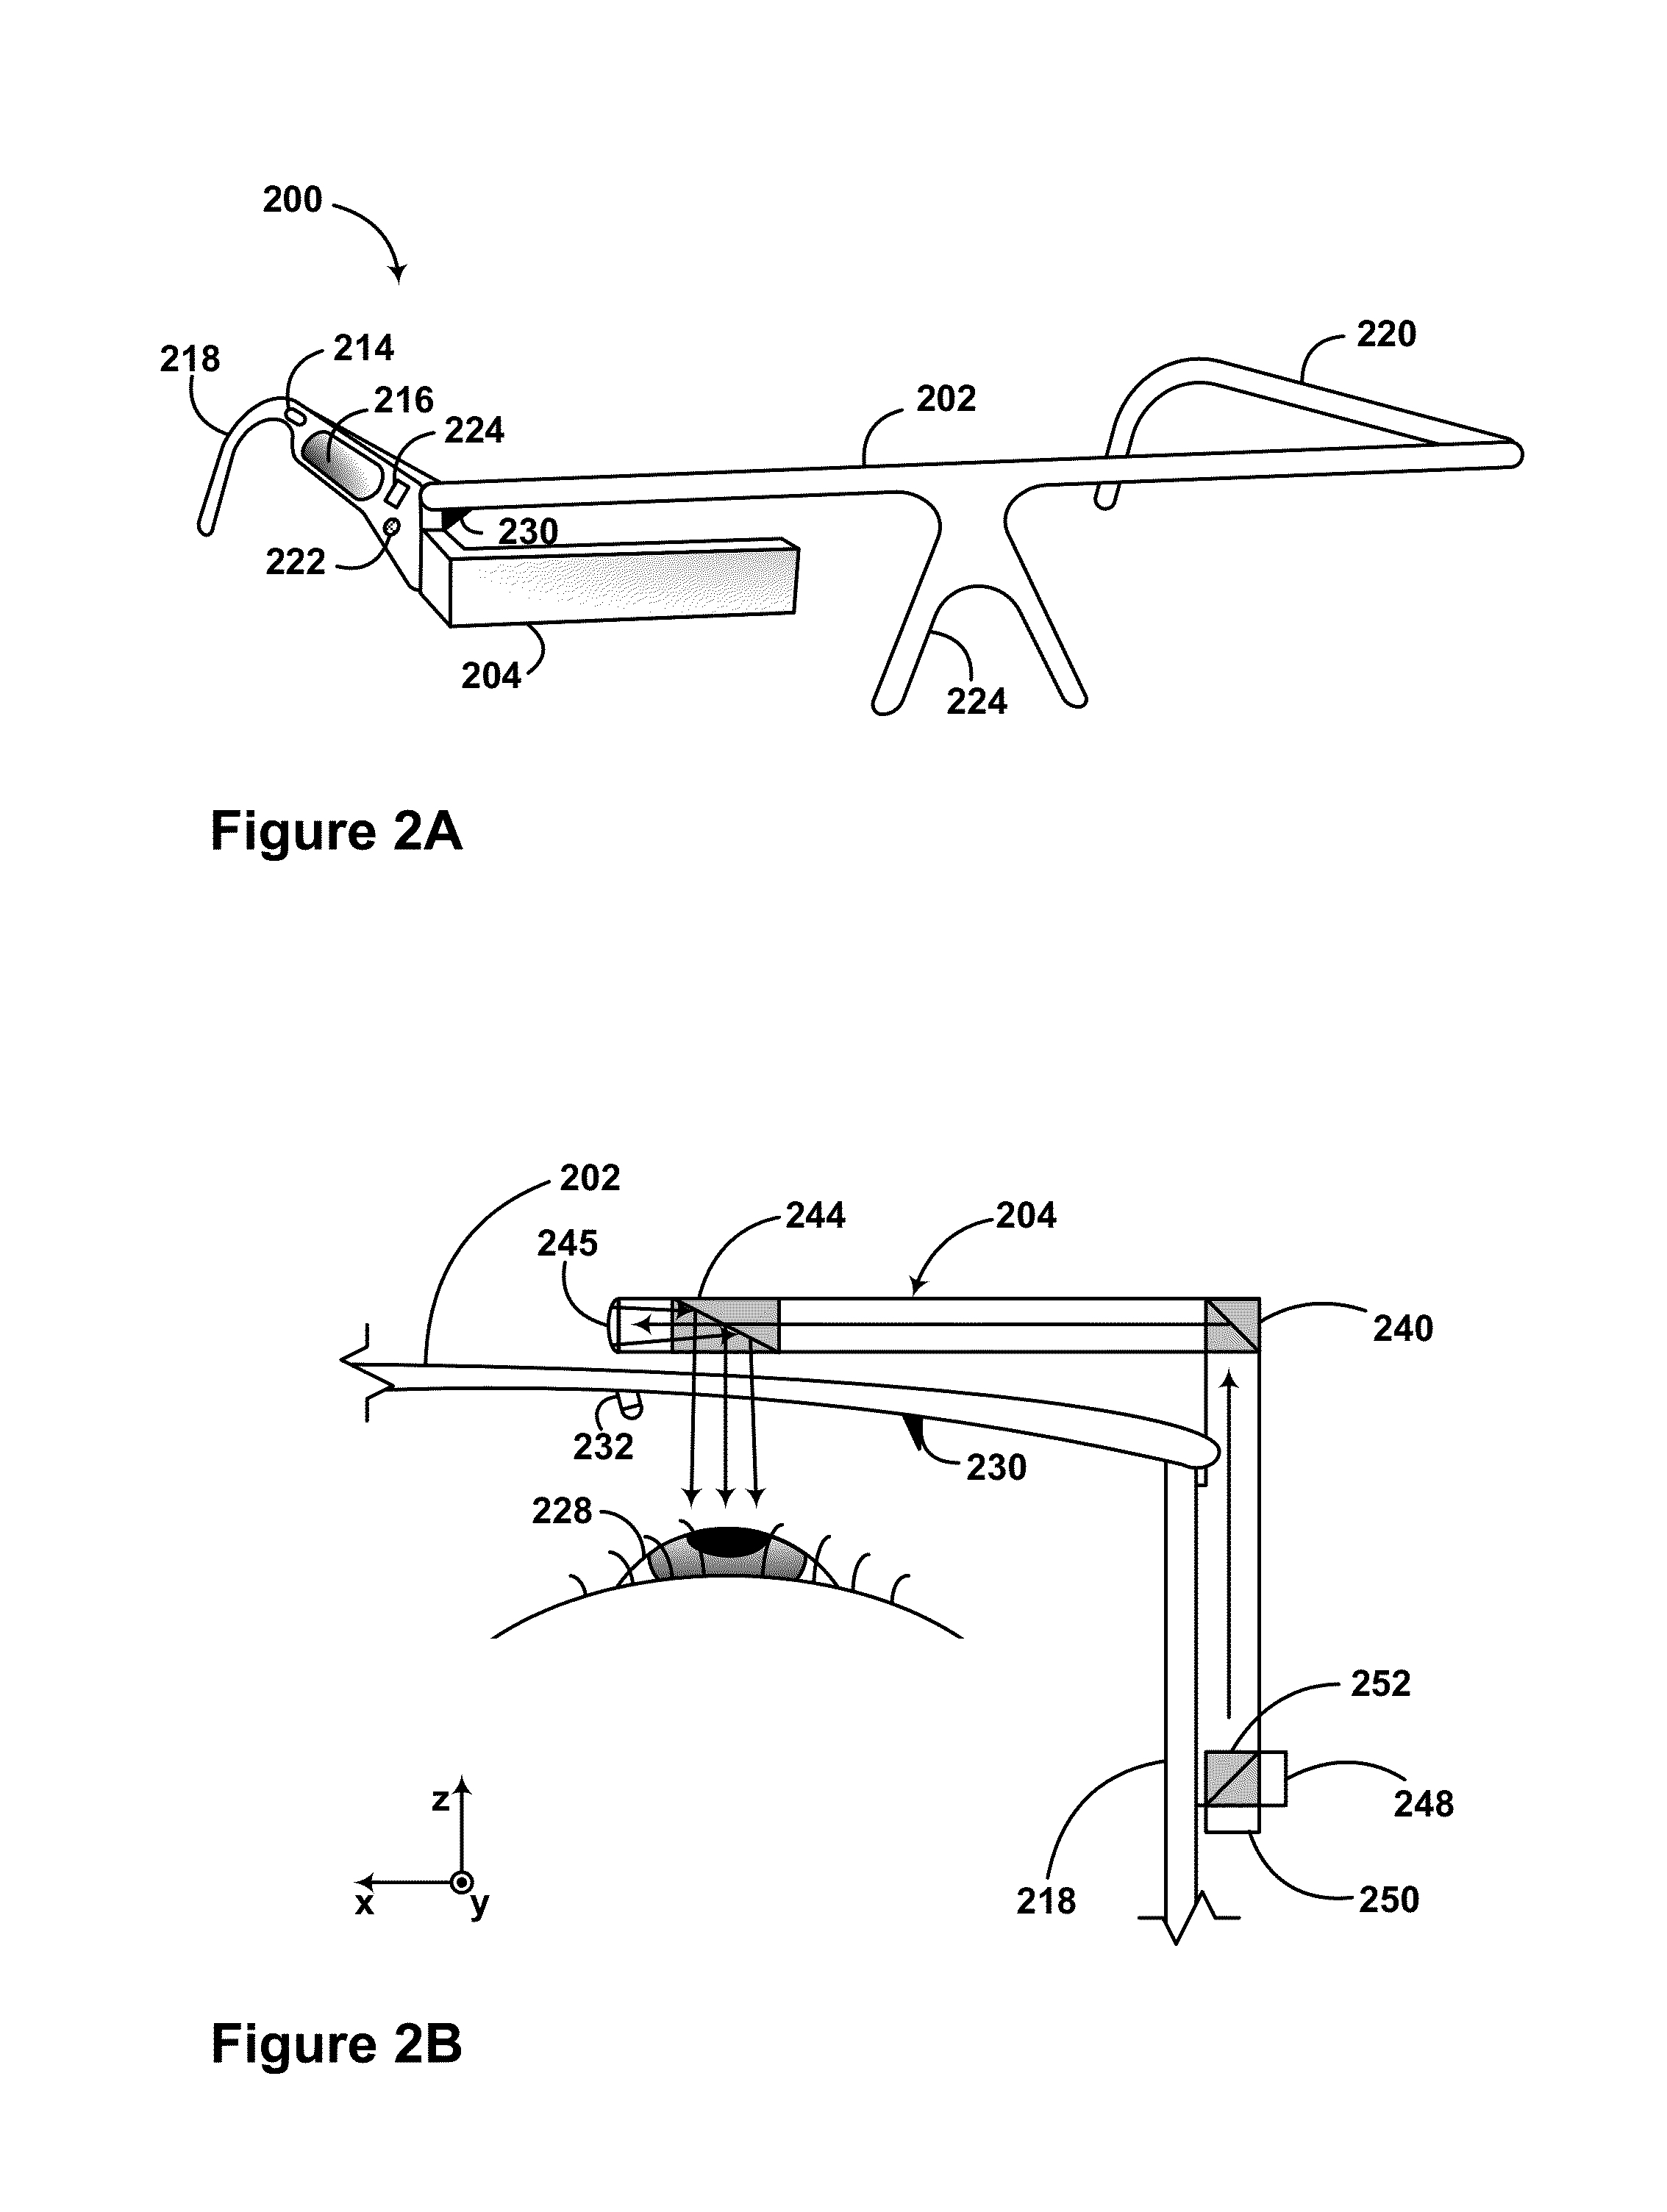 Method and system for input detection using structured light projection